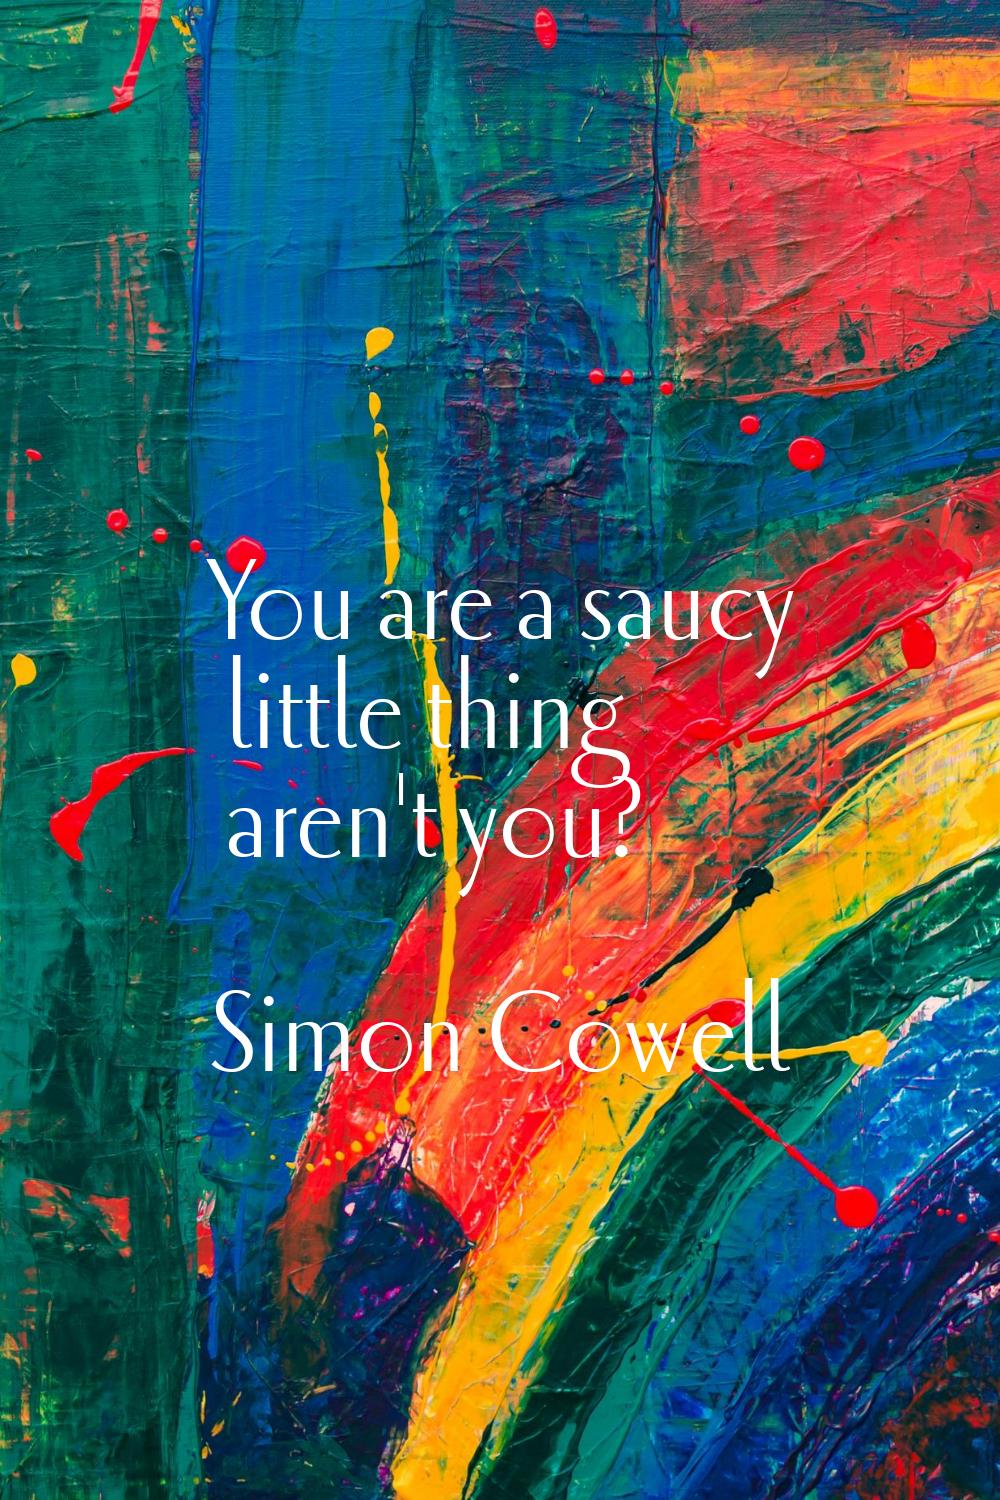 You are a saucy little thing aren't you?